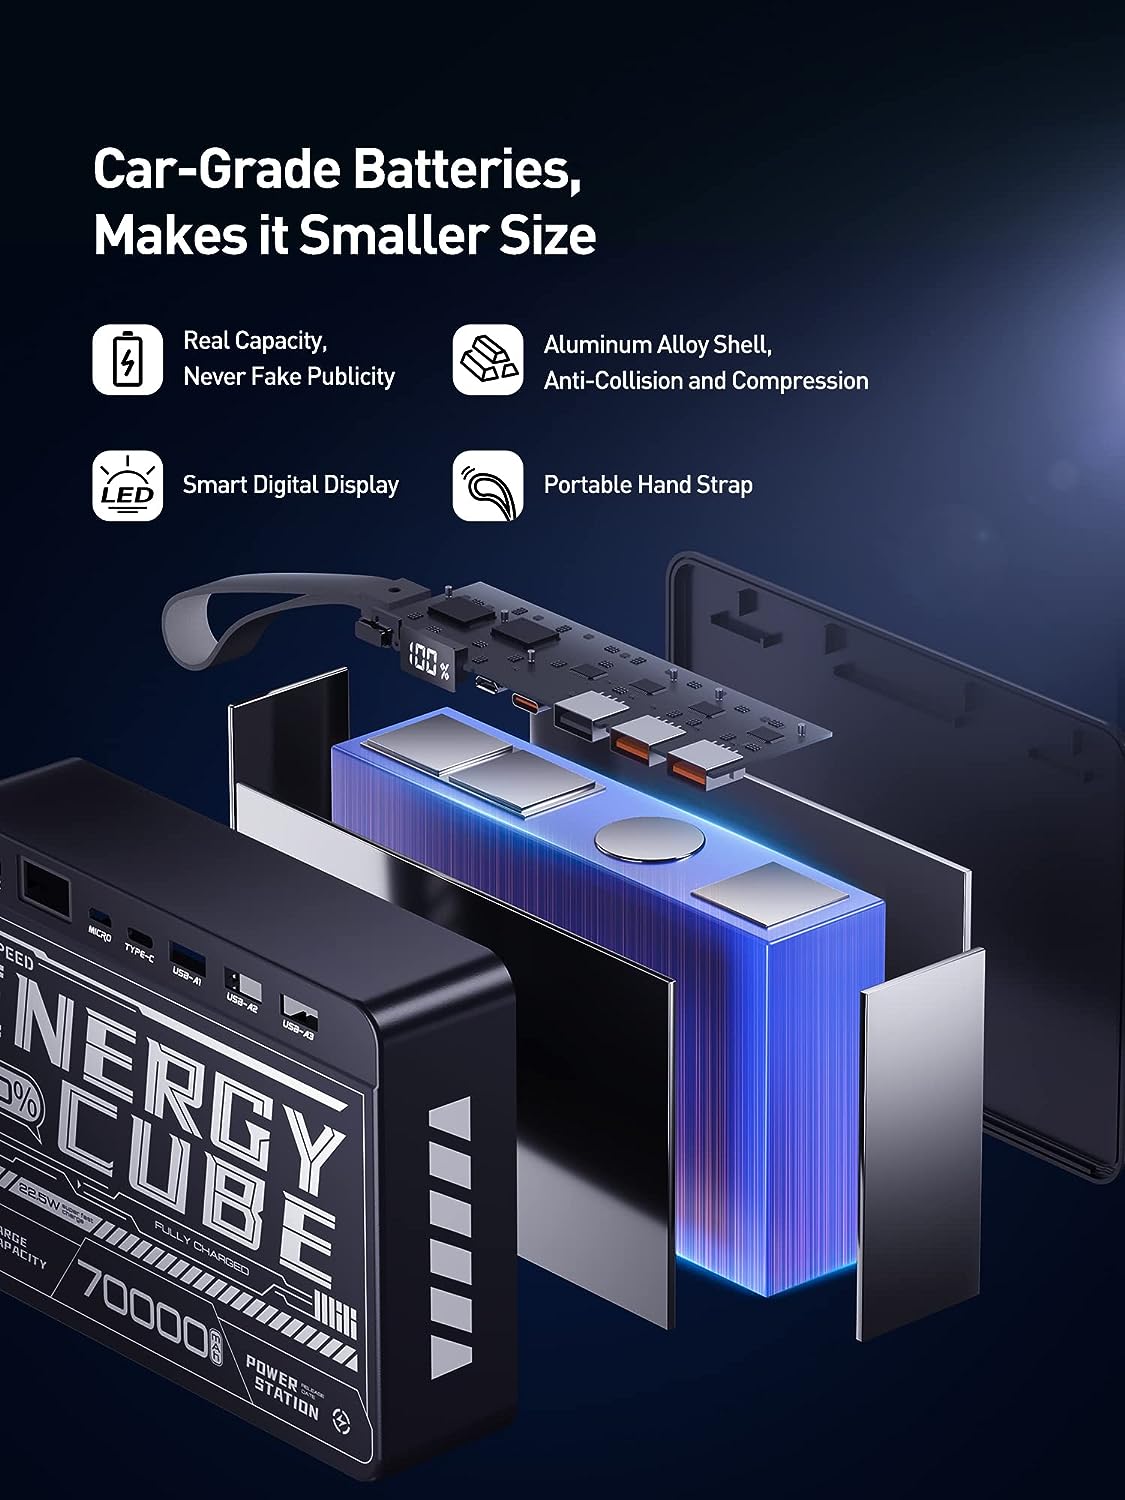 MOVESPEED 70000mAh Power Bank High Capacity, 22.5W Max PD 3.0 Fast Charging, Large Power Bank,4 Outputs 2 Inputs,LED Display,USB-C Battery Packs for iPhone, Samsung, Outdoors Camping, Cyberpunk Style - MOVESPEED